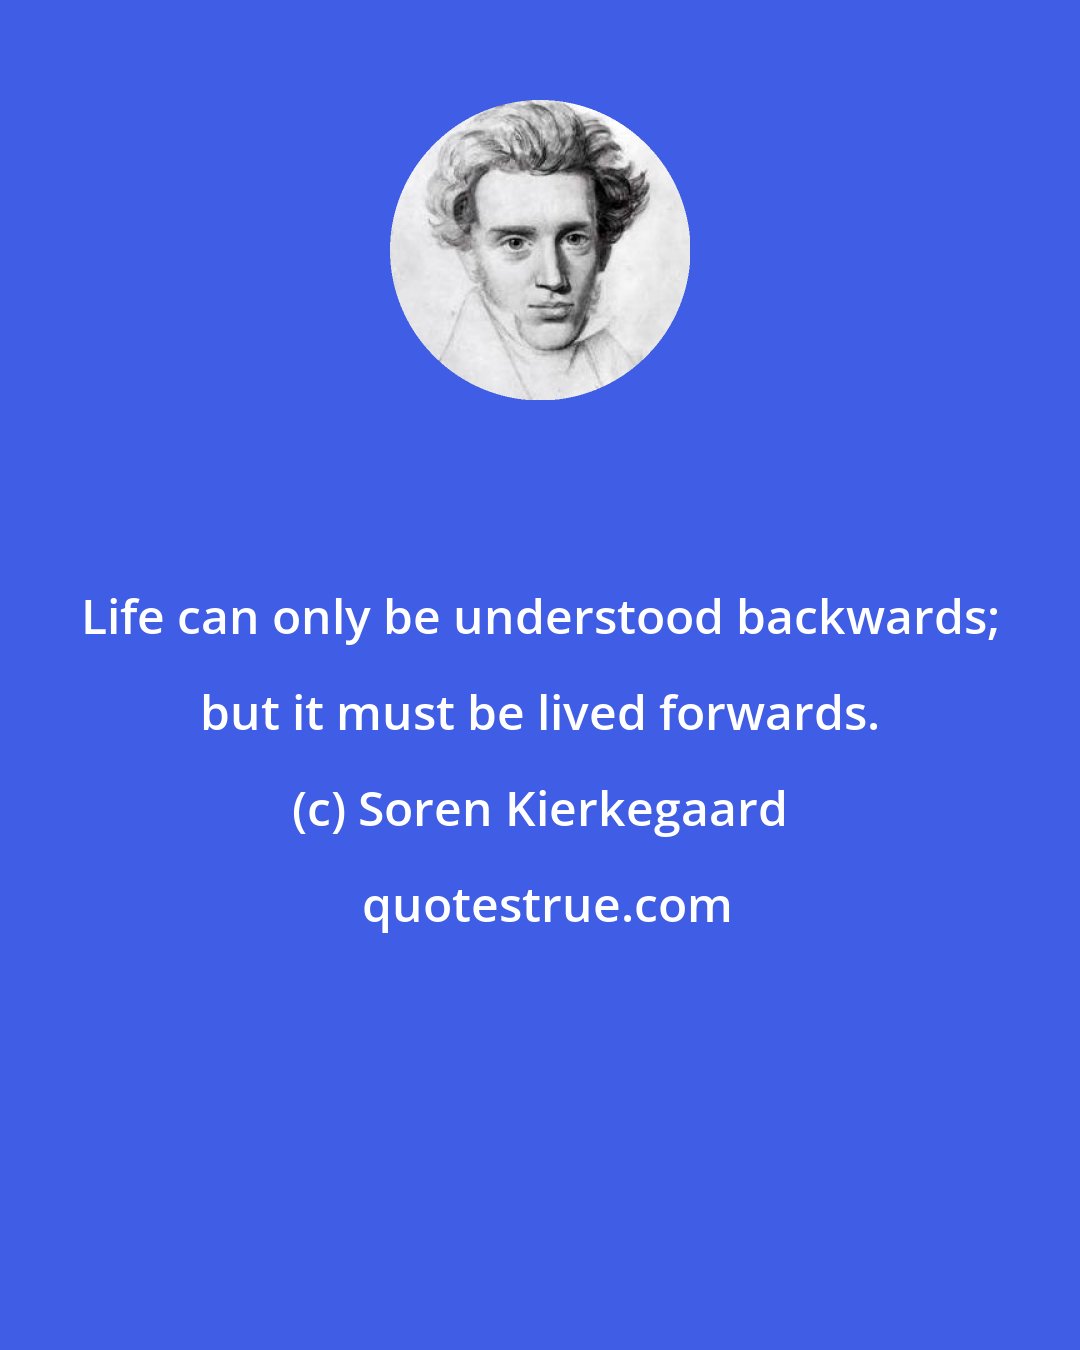 Soren Kierkegaard: Life can only be understood backwards; but it must be lived forwards.